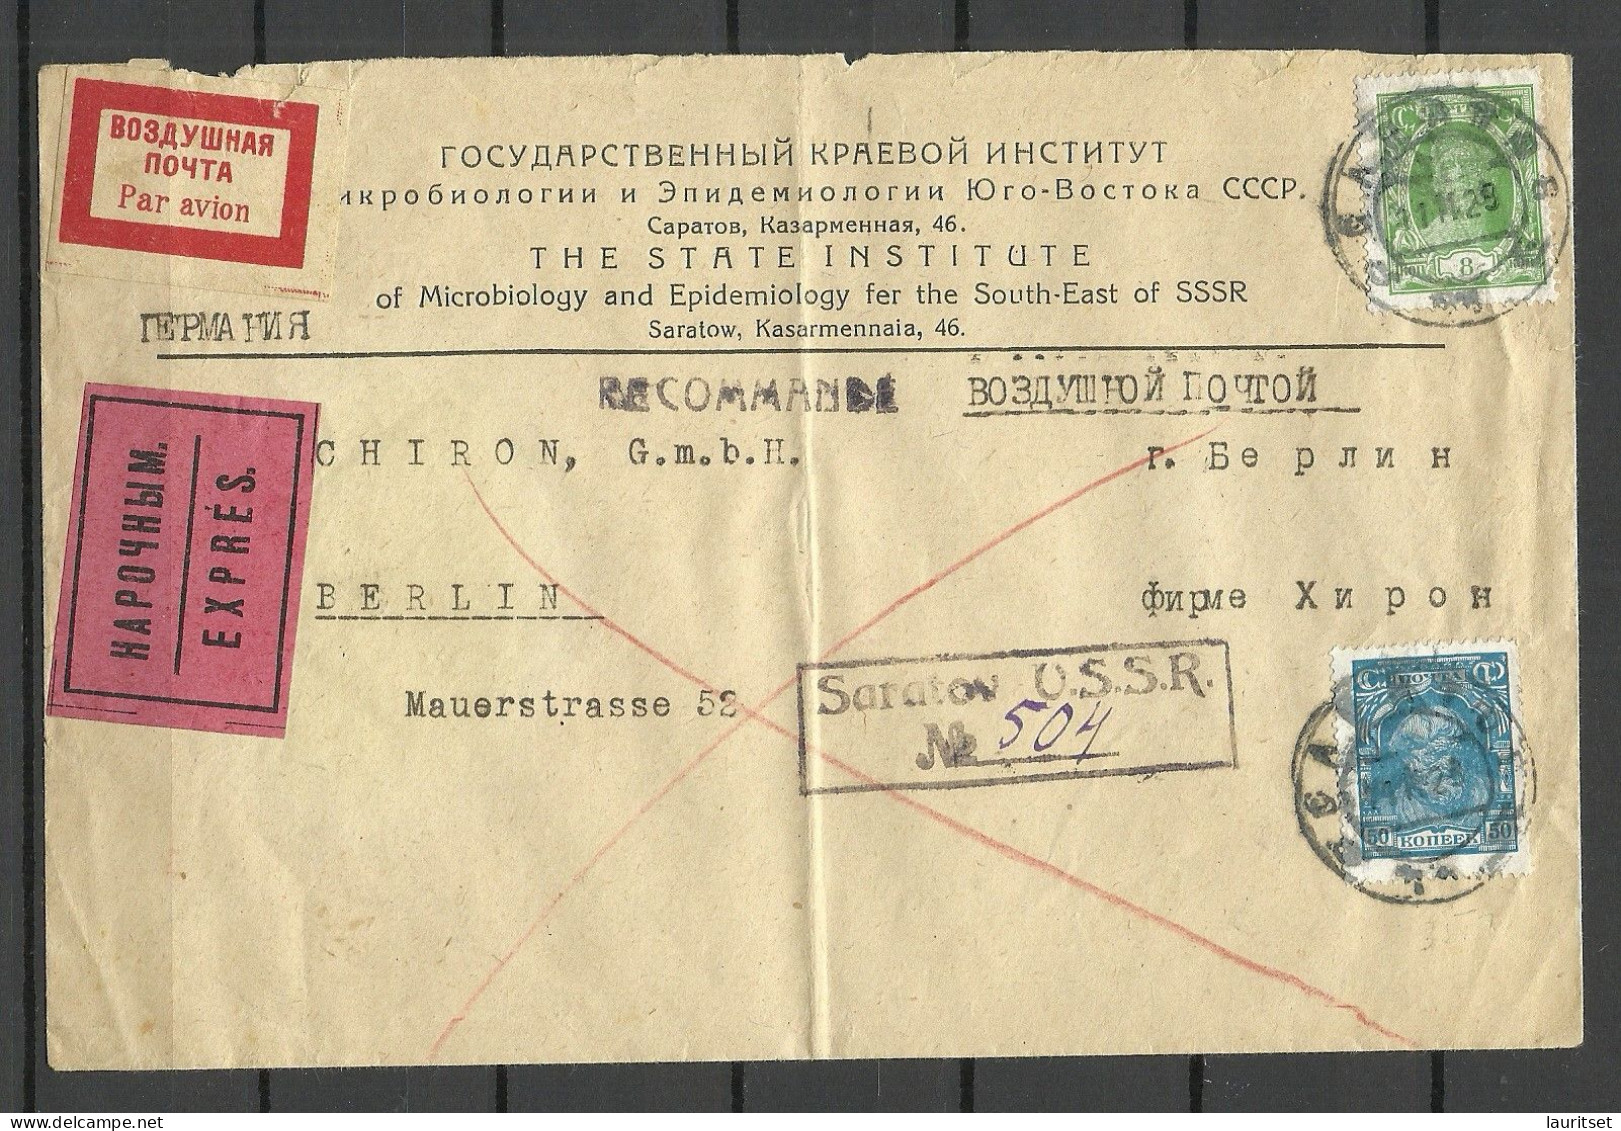 RUSSLAND RUSSIA Soviet Union 1928 Expres Air Mail Cover O Saratow To Germany NB! Vertical Fold In The Middle - Storia Postale